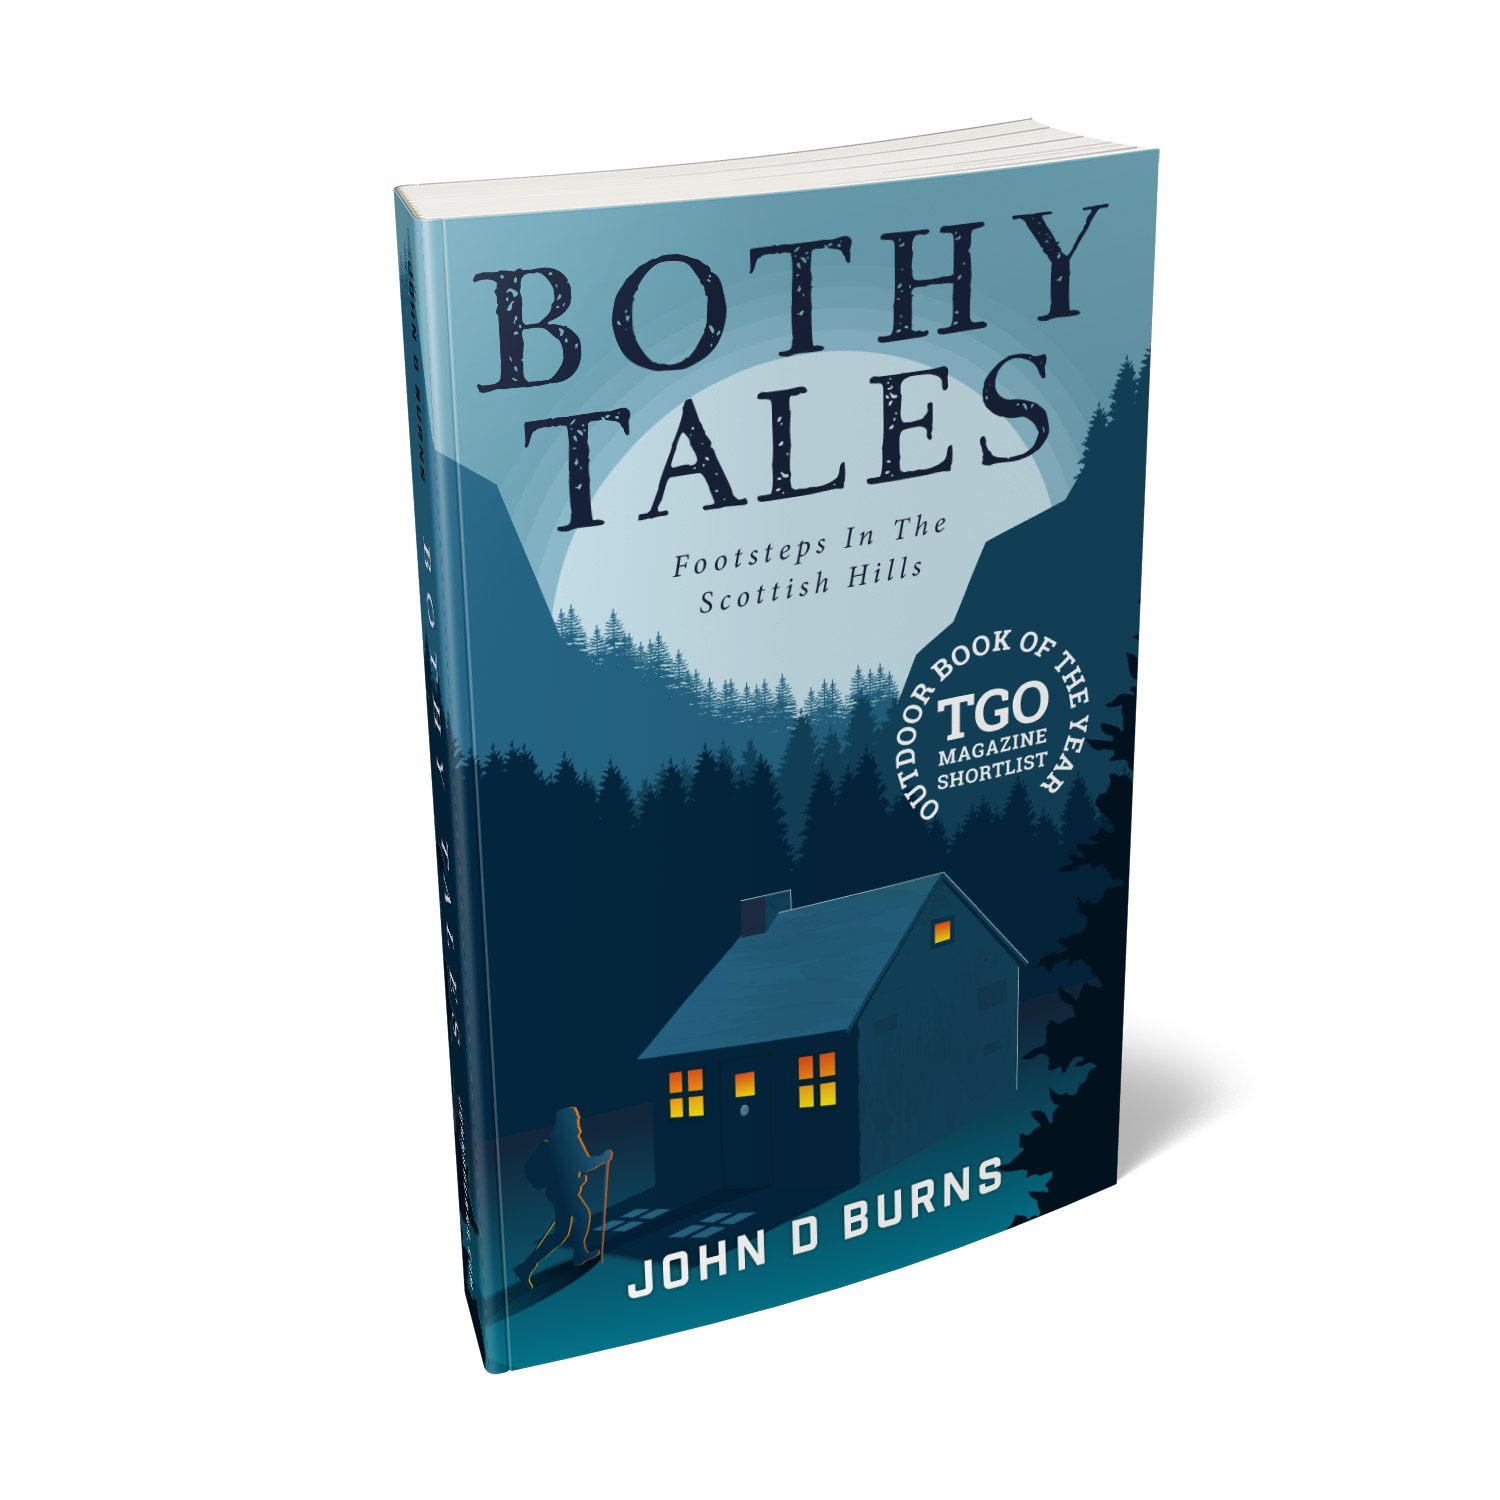 'Bothy Tales' is a bespoke cover design for a personal, retrospective hillwalking memoir. The book cover was designed by Mark Thomas, of coverness.com. To find out more about my book design services, please visit www.coverness.com.